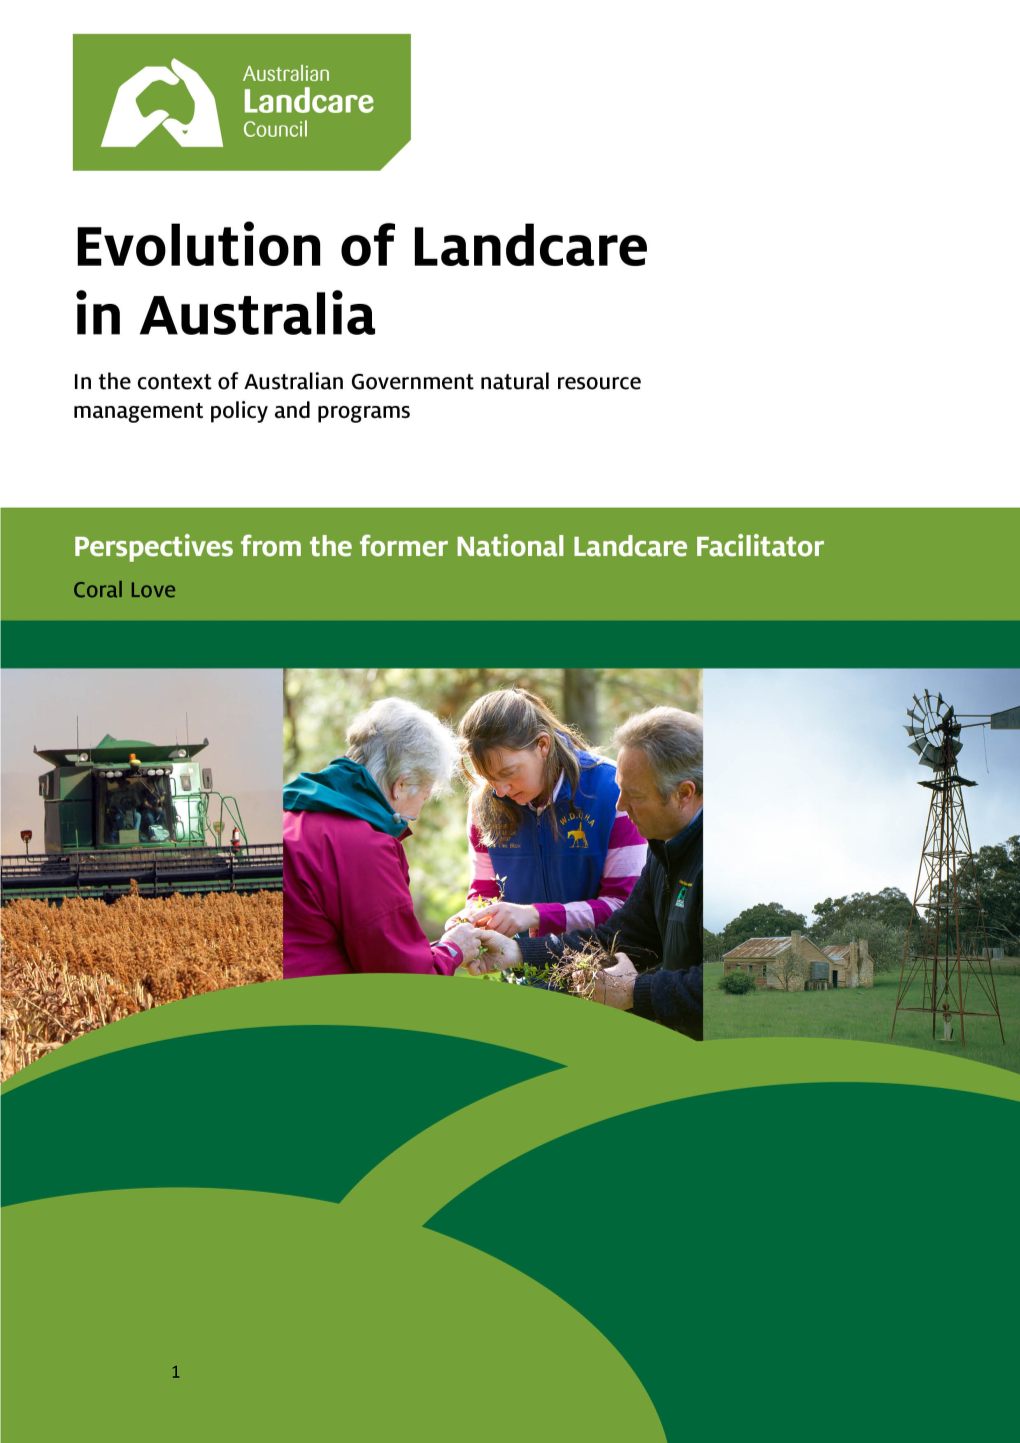 During the Late 1980S and Early 1990S a Number of State Departments Adopted a Landcare